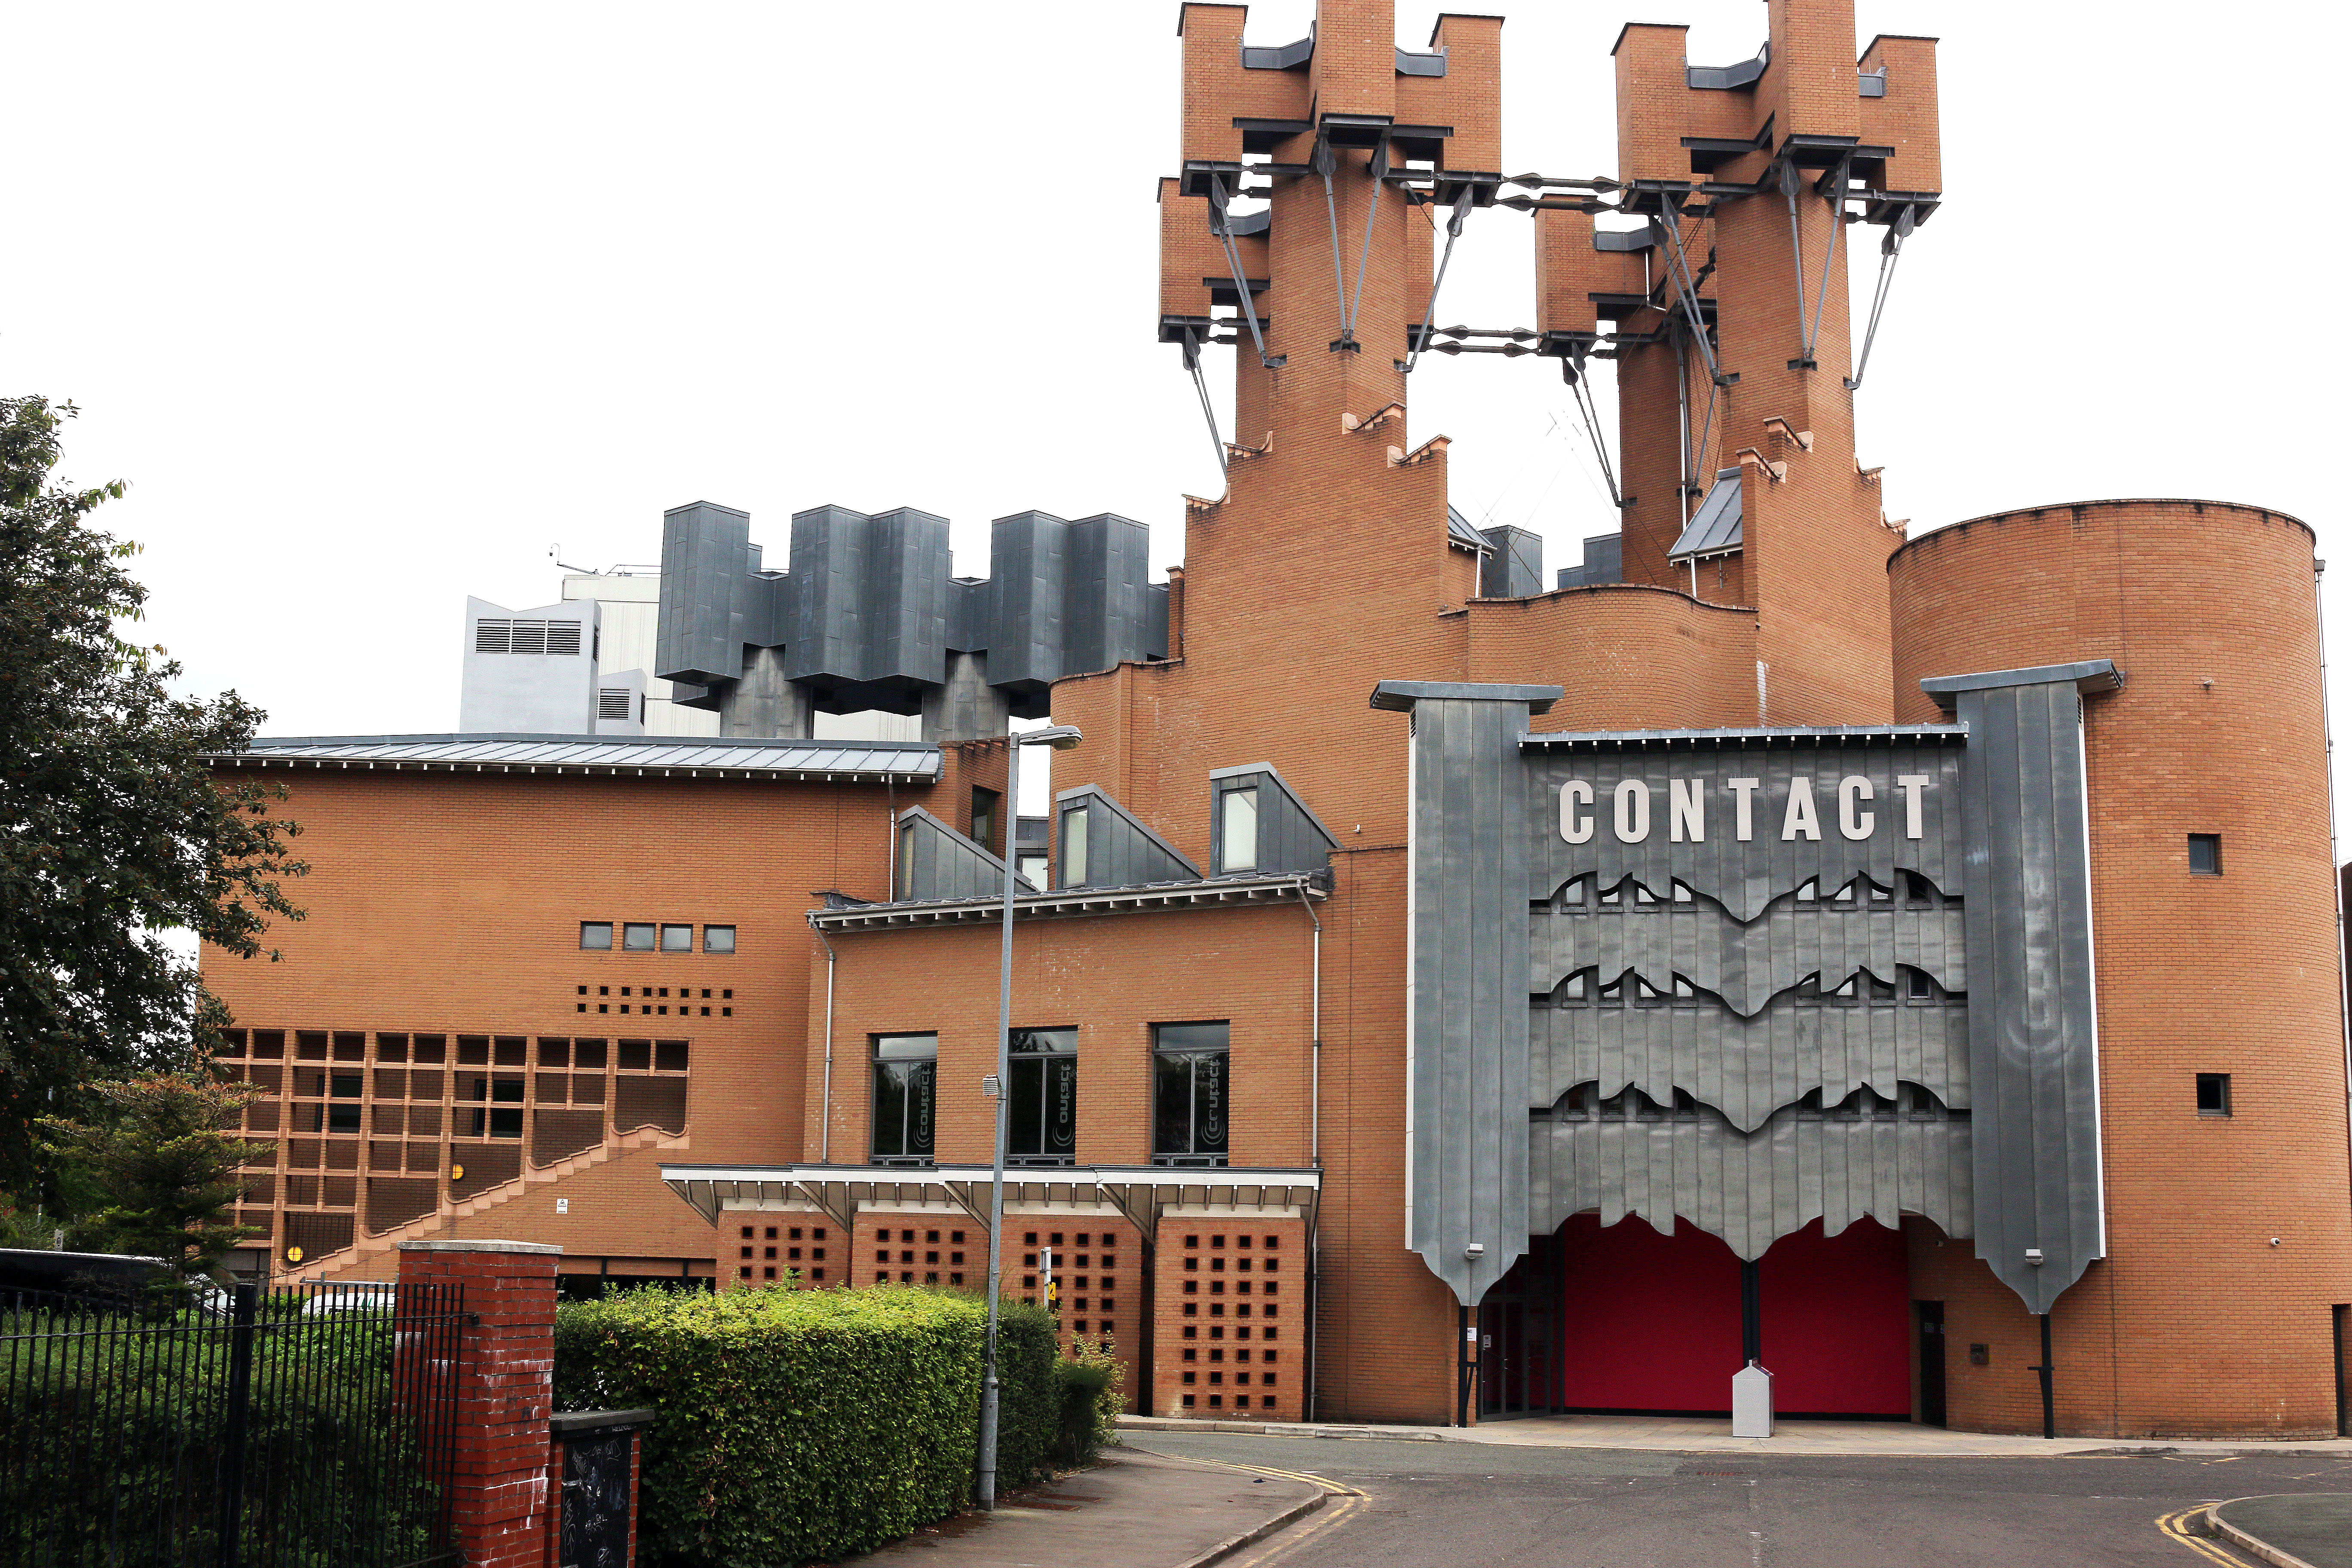 Exterior of Contact theatre in Manchester